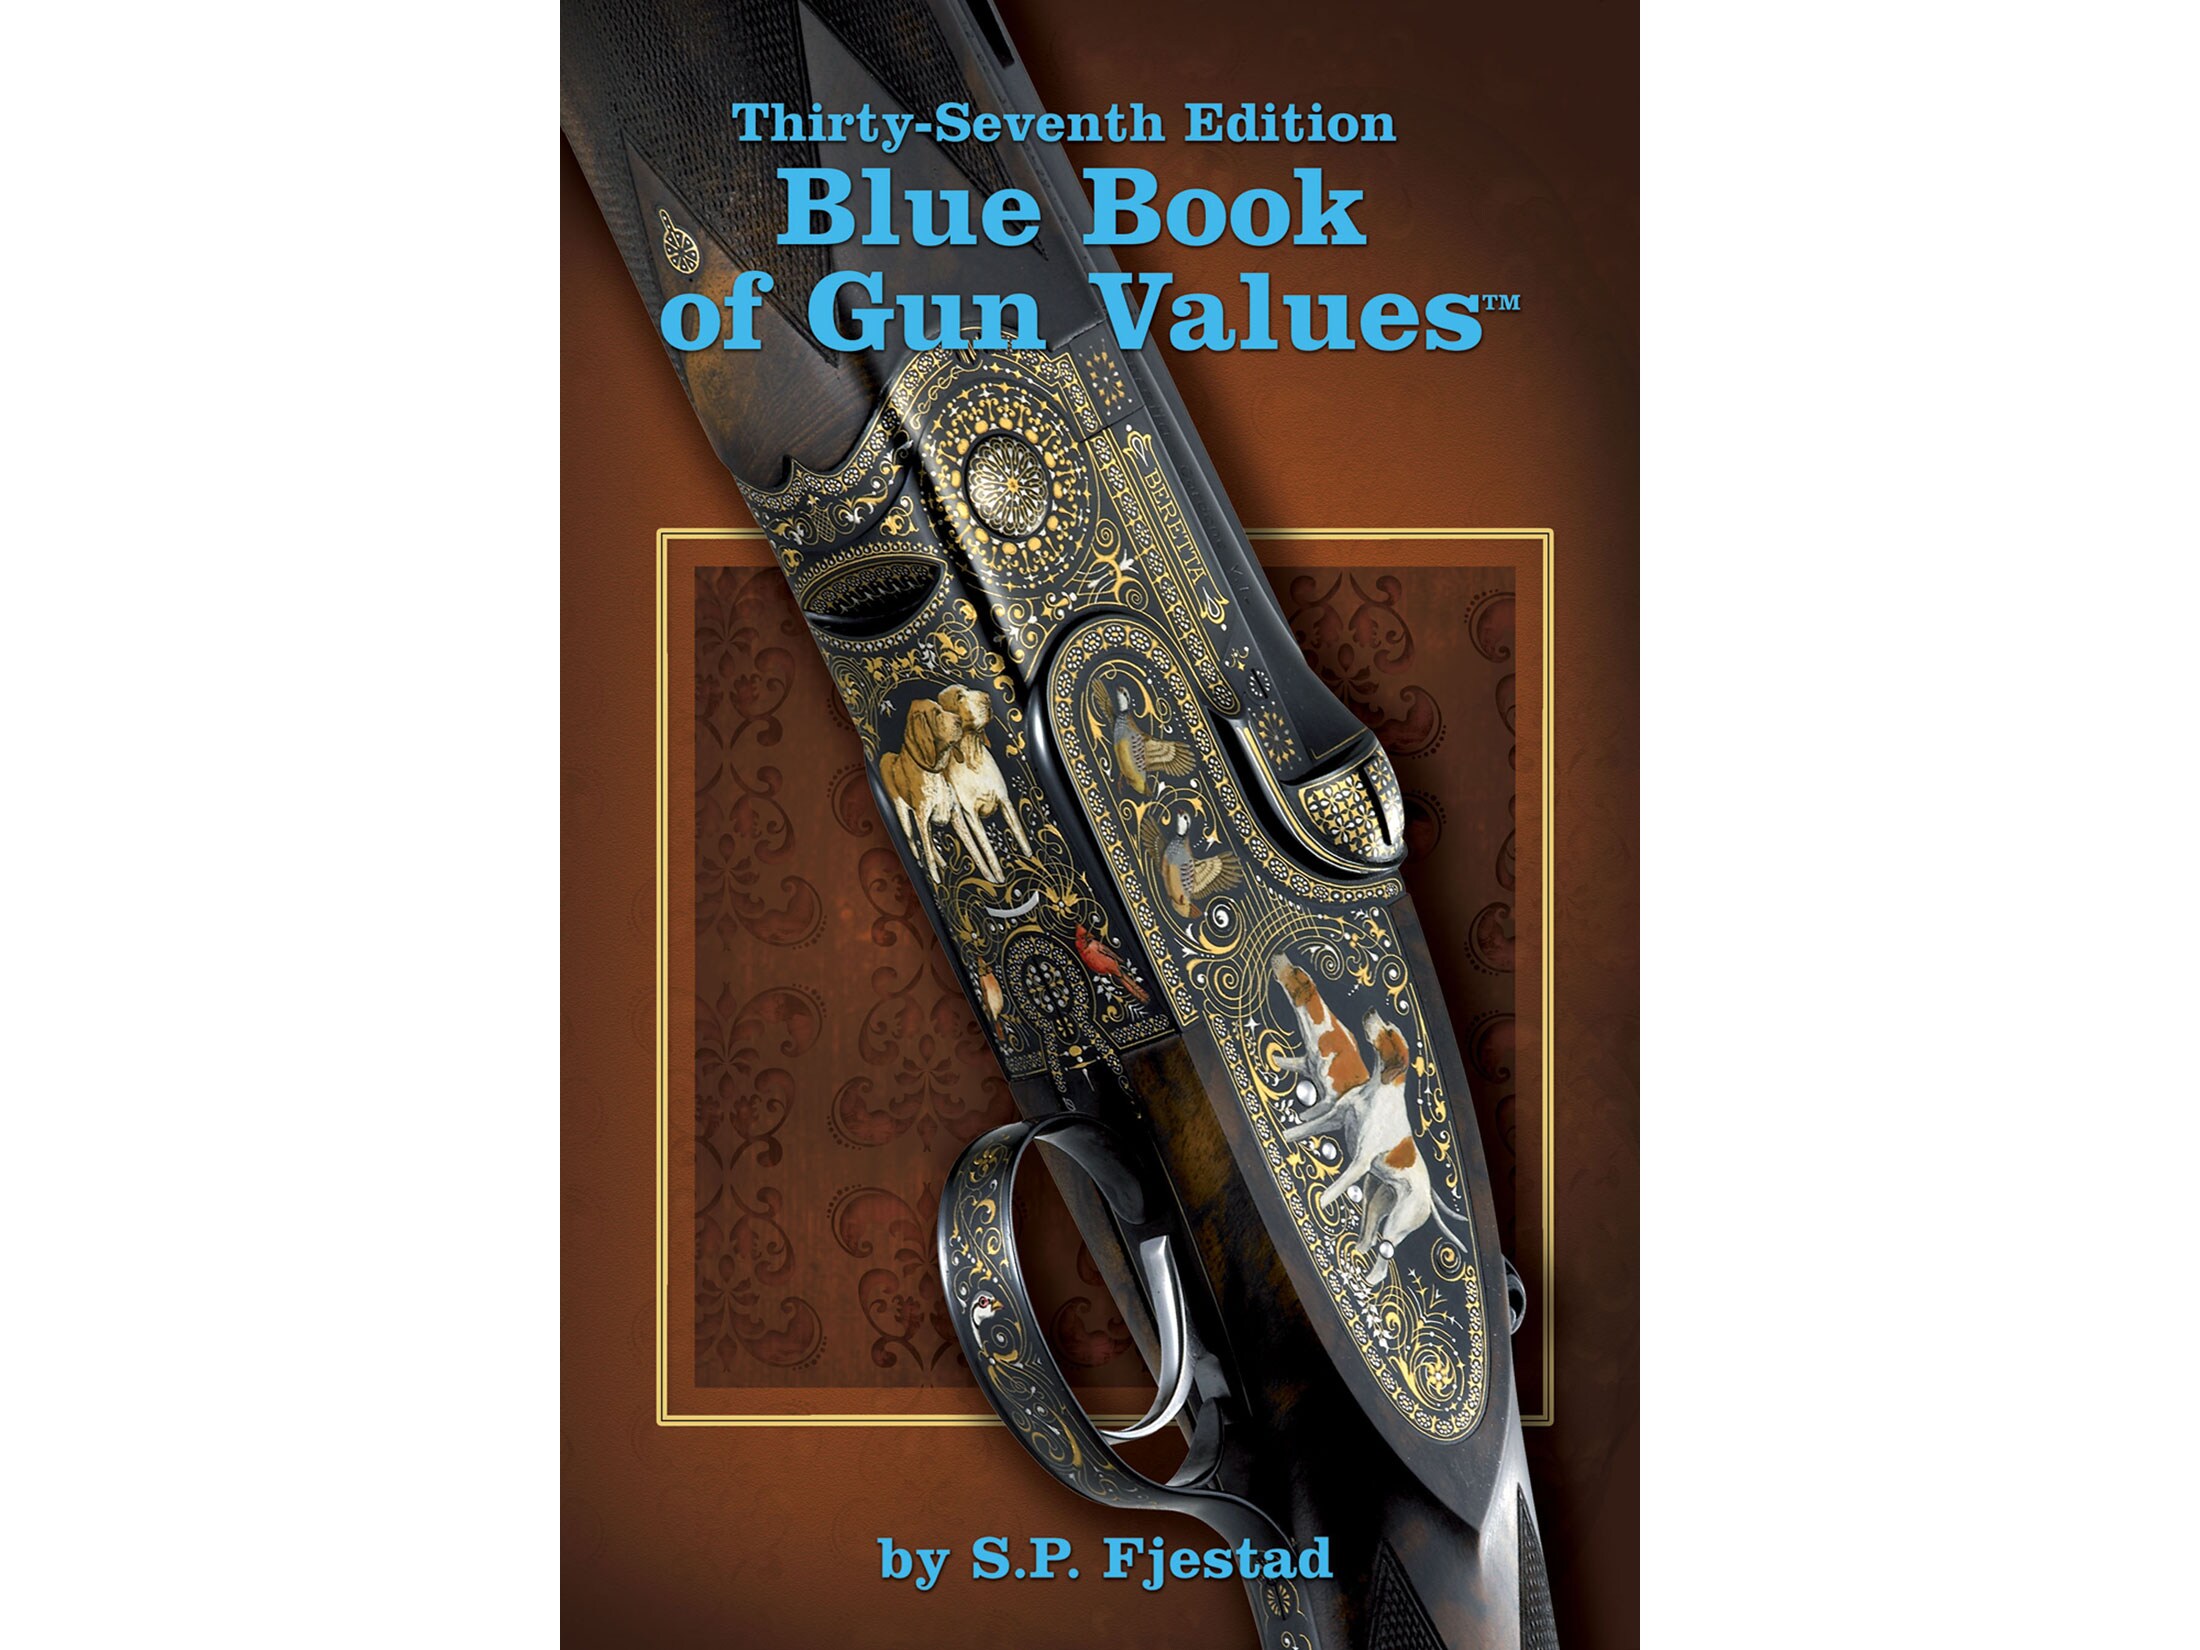 Blue Book of Gun Values by S P Fjestad 